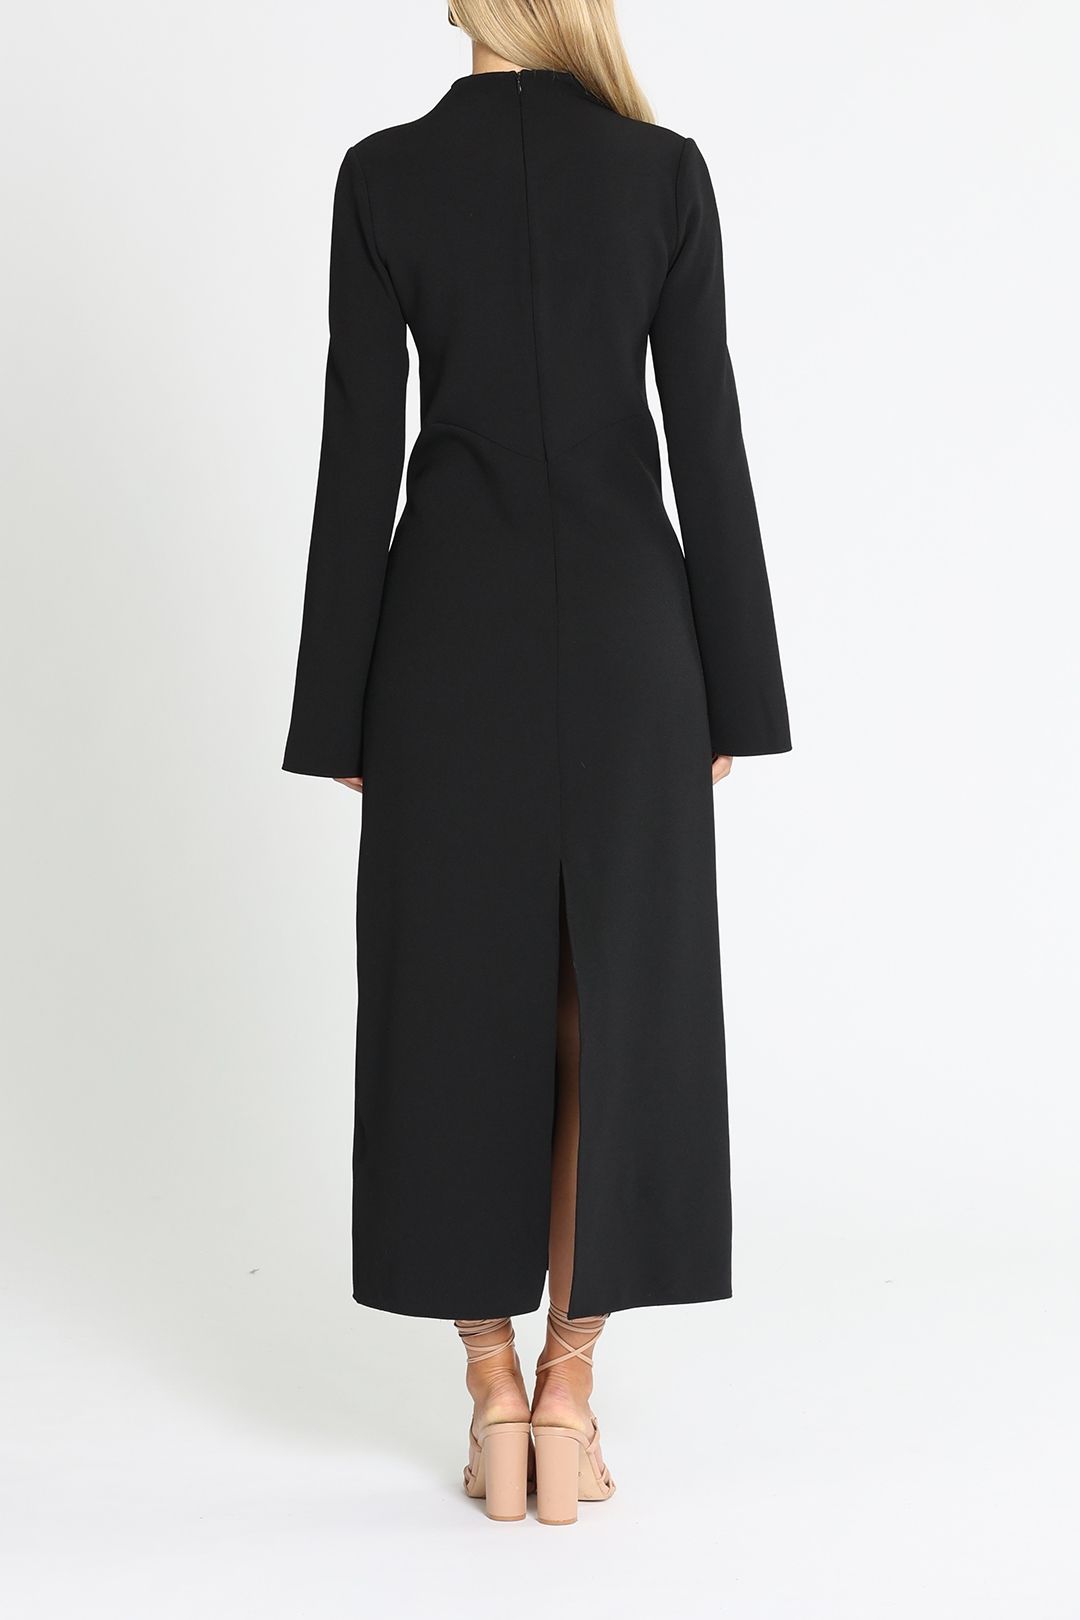 Camilla and Marc Knight Dress Black Flared Sleeves